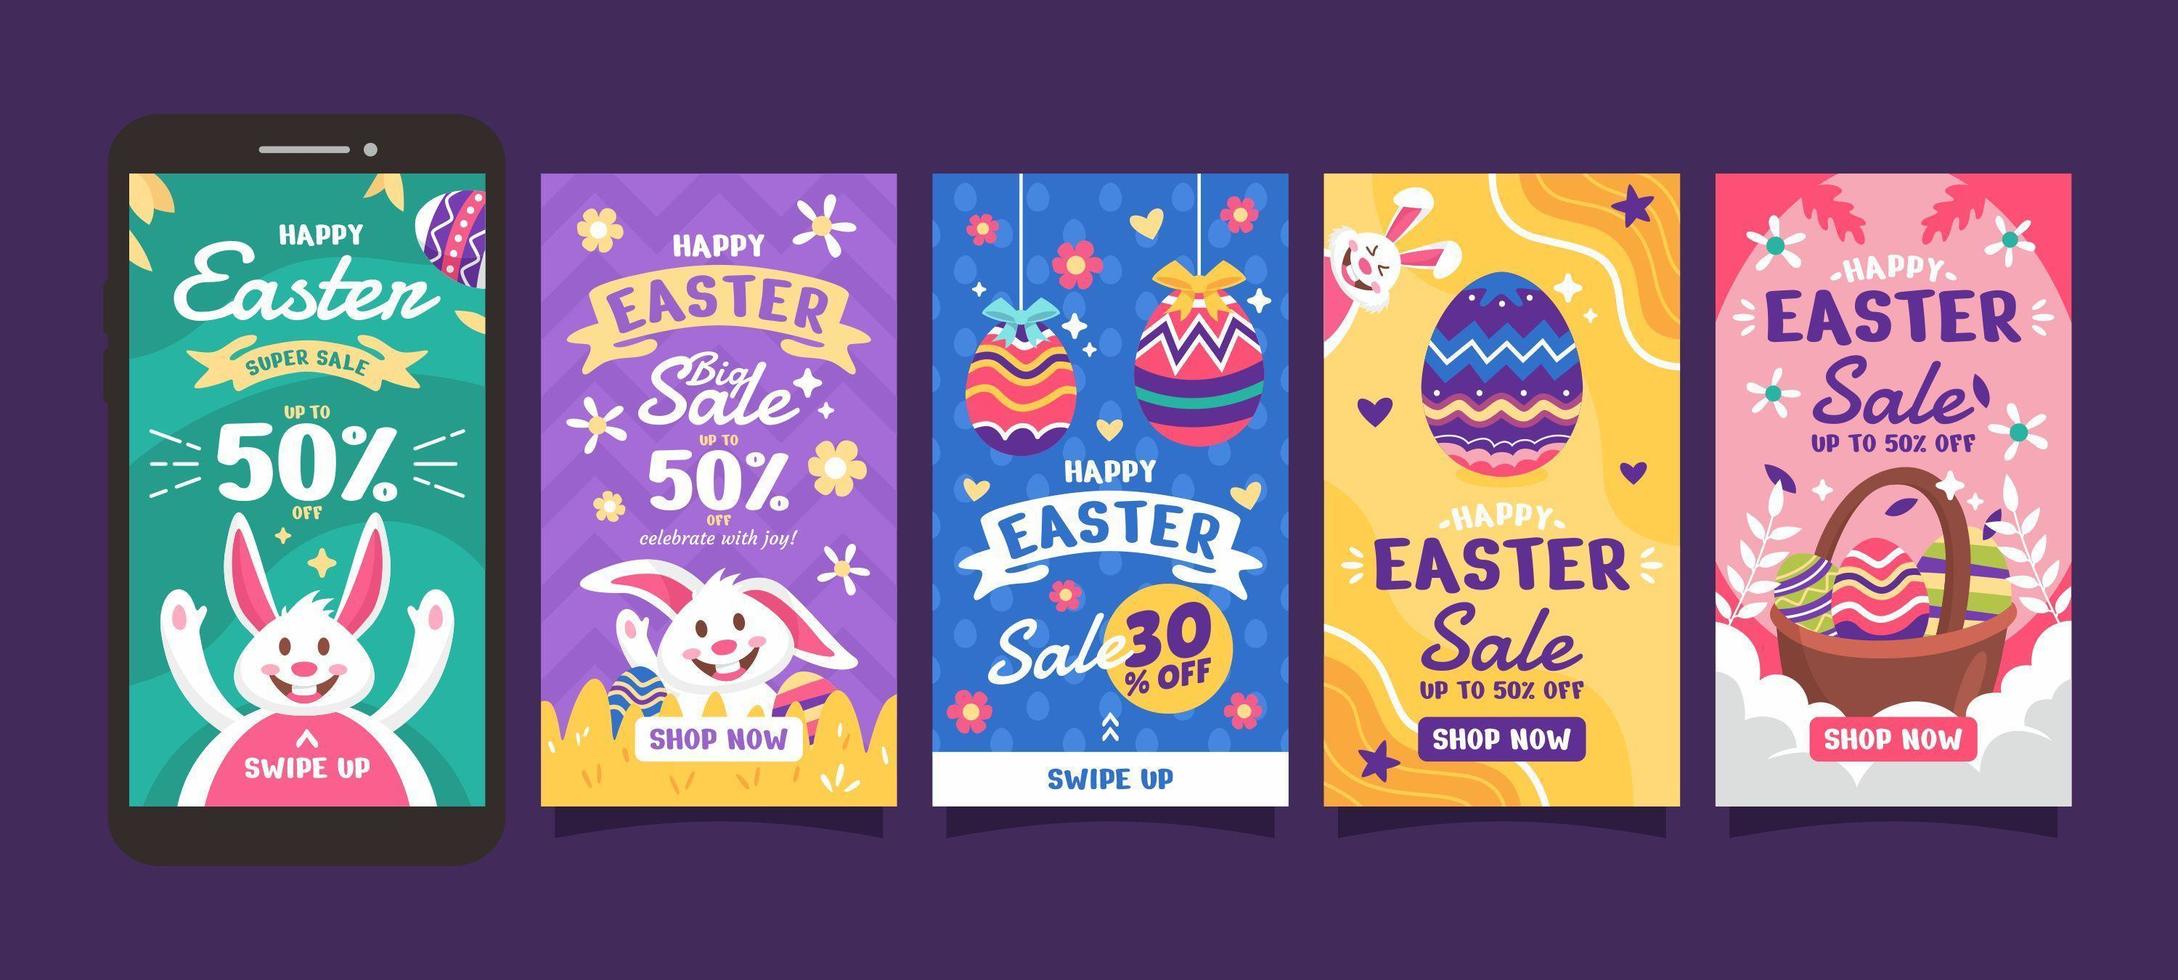 Easter Day Instagram Stories Collection vector